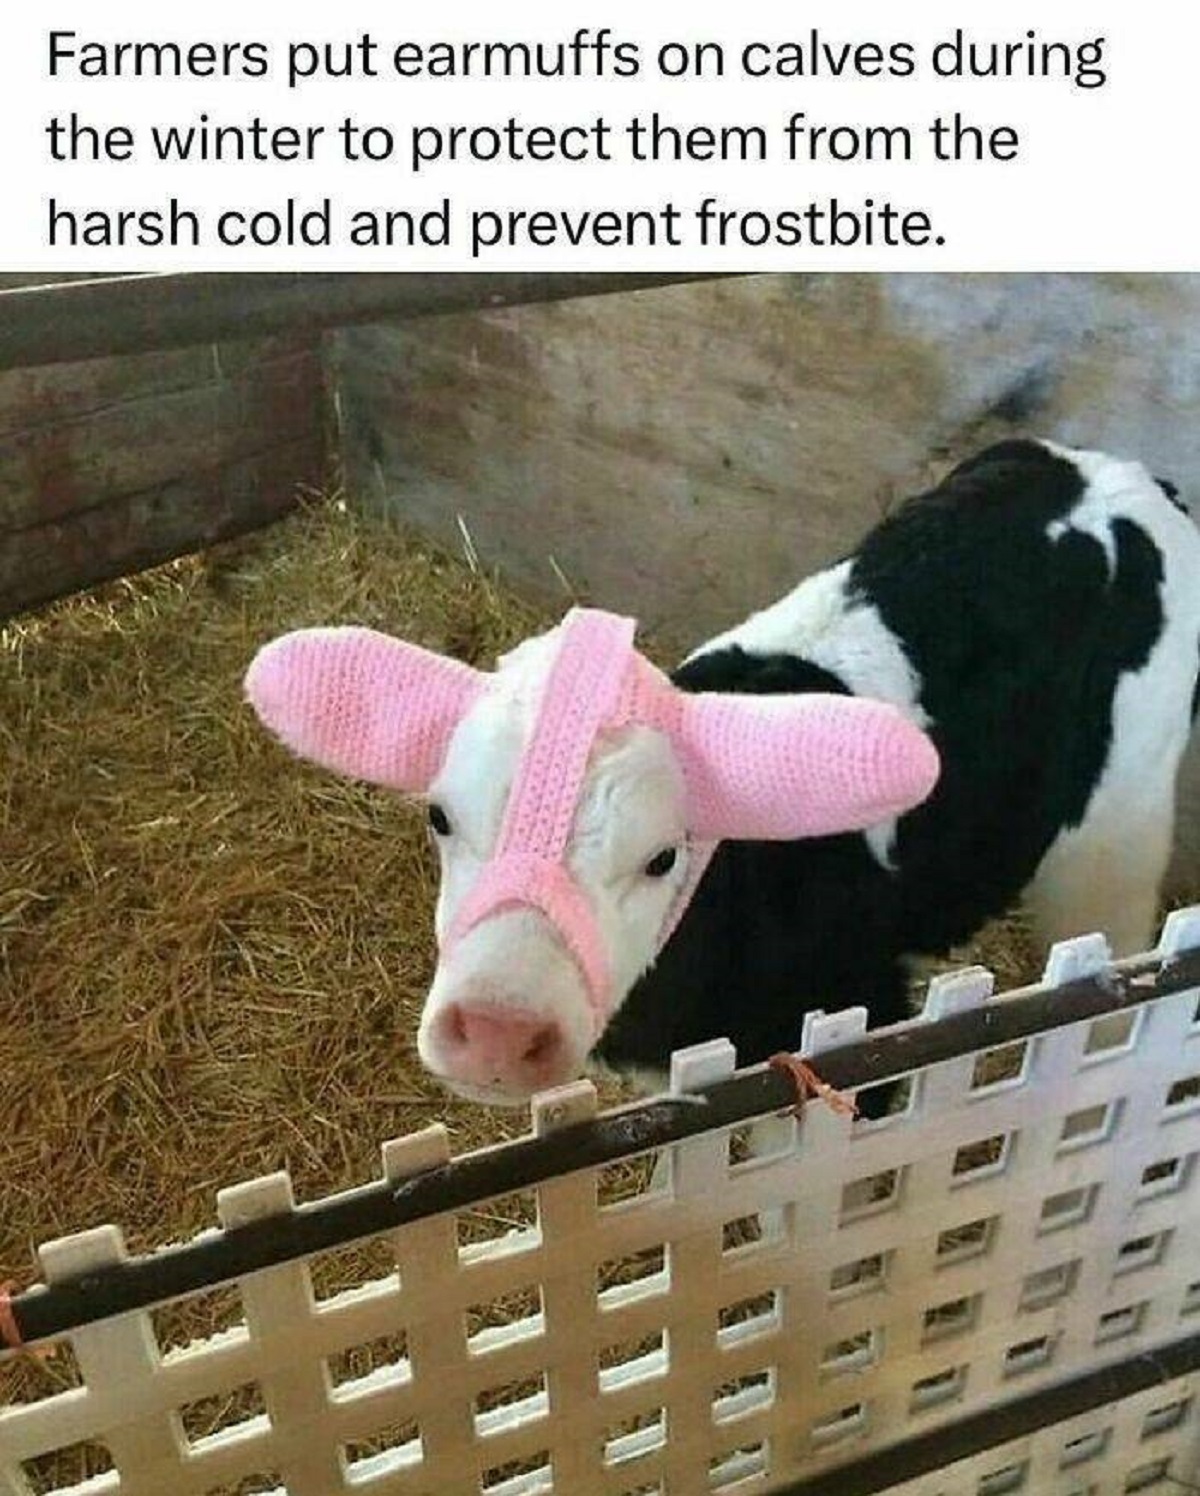 cow with ear muffs - Farmers put earmuffs on calves during the winter to protect them from the harsh cold and prevent frostbite.